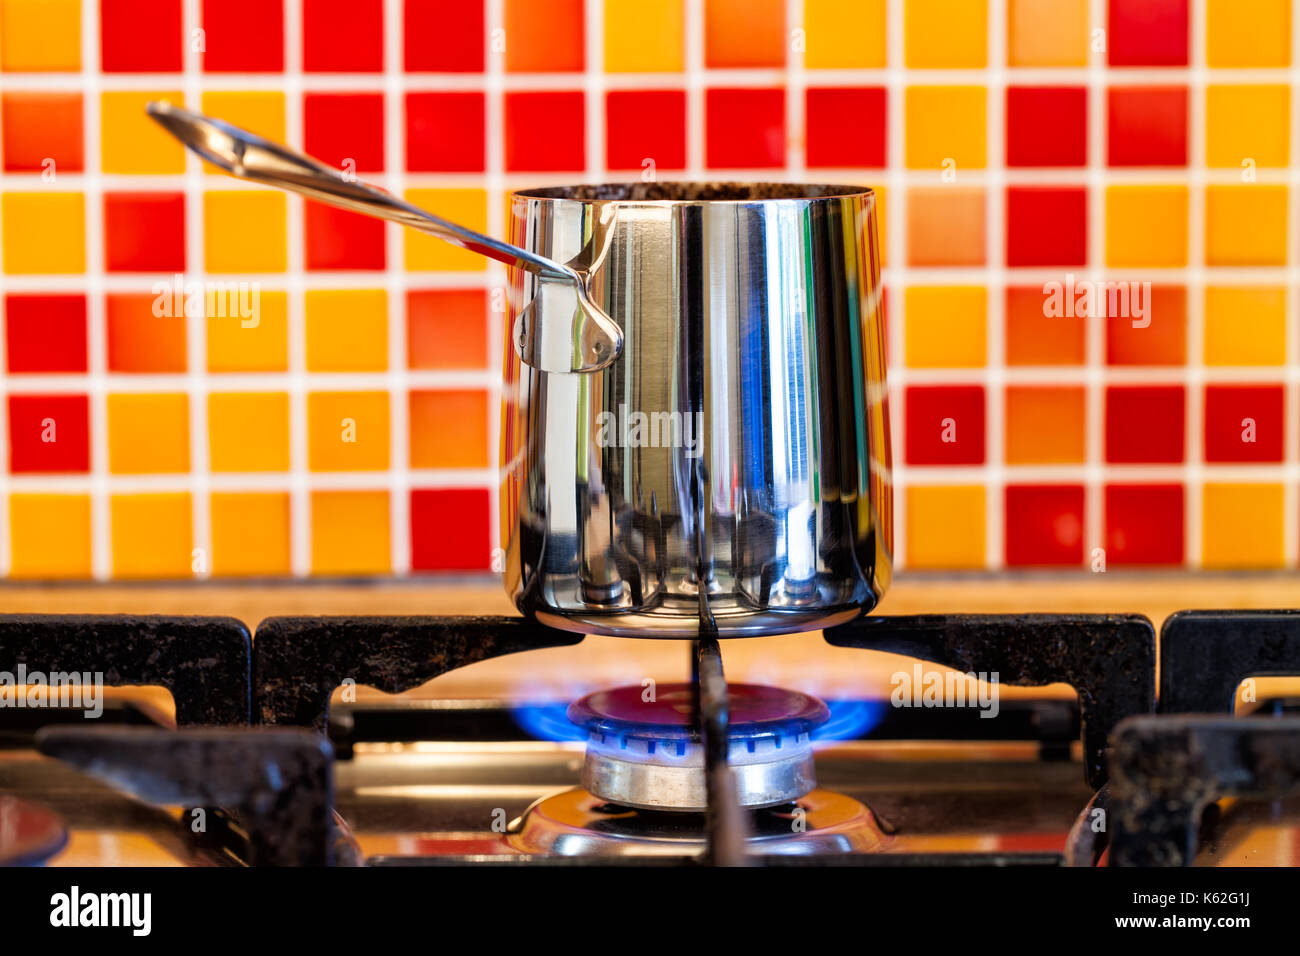 Turka With Coffee On The Gas Stove. Stock Photo, Picture and